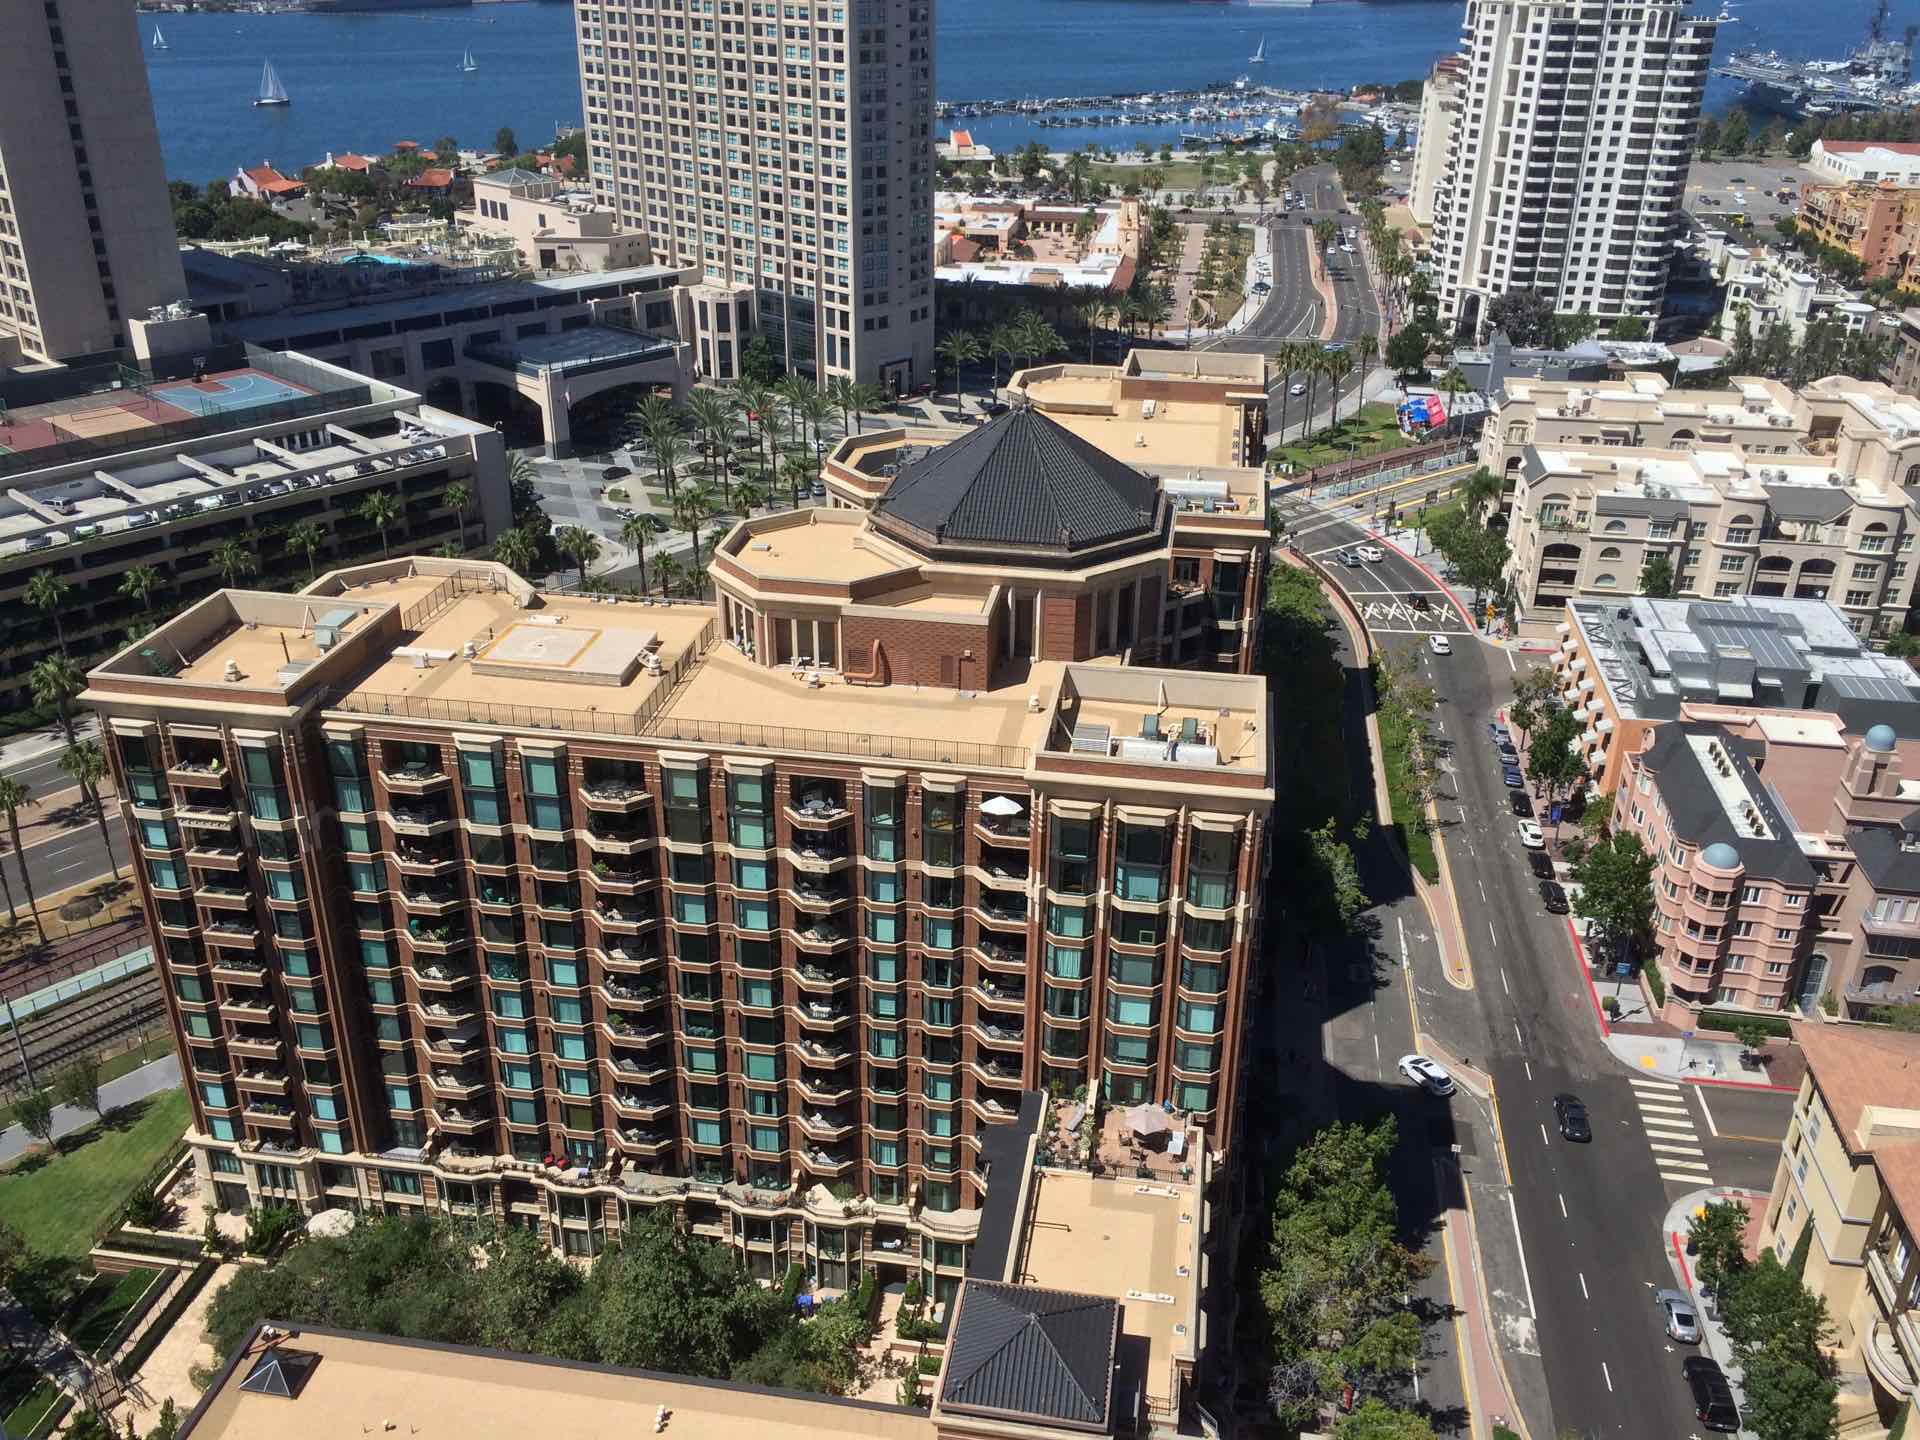 cityfront terrace luxury condo building from the air